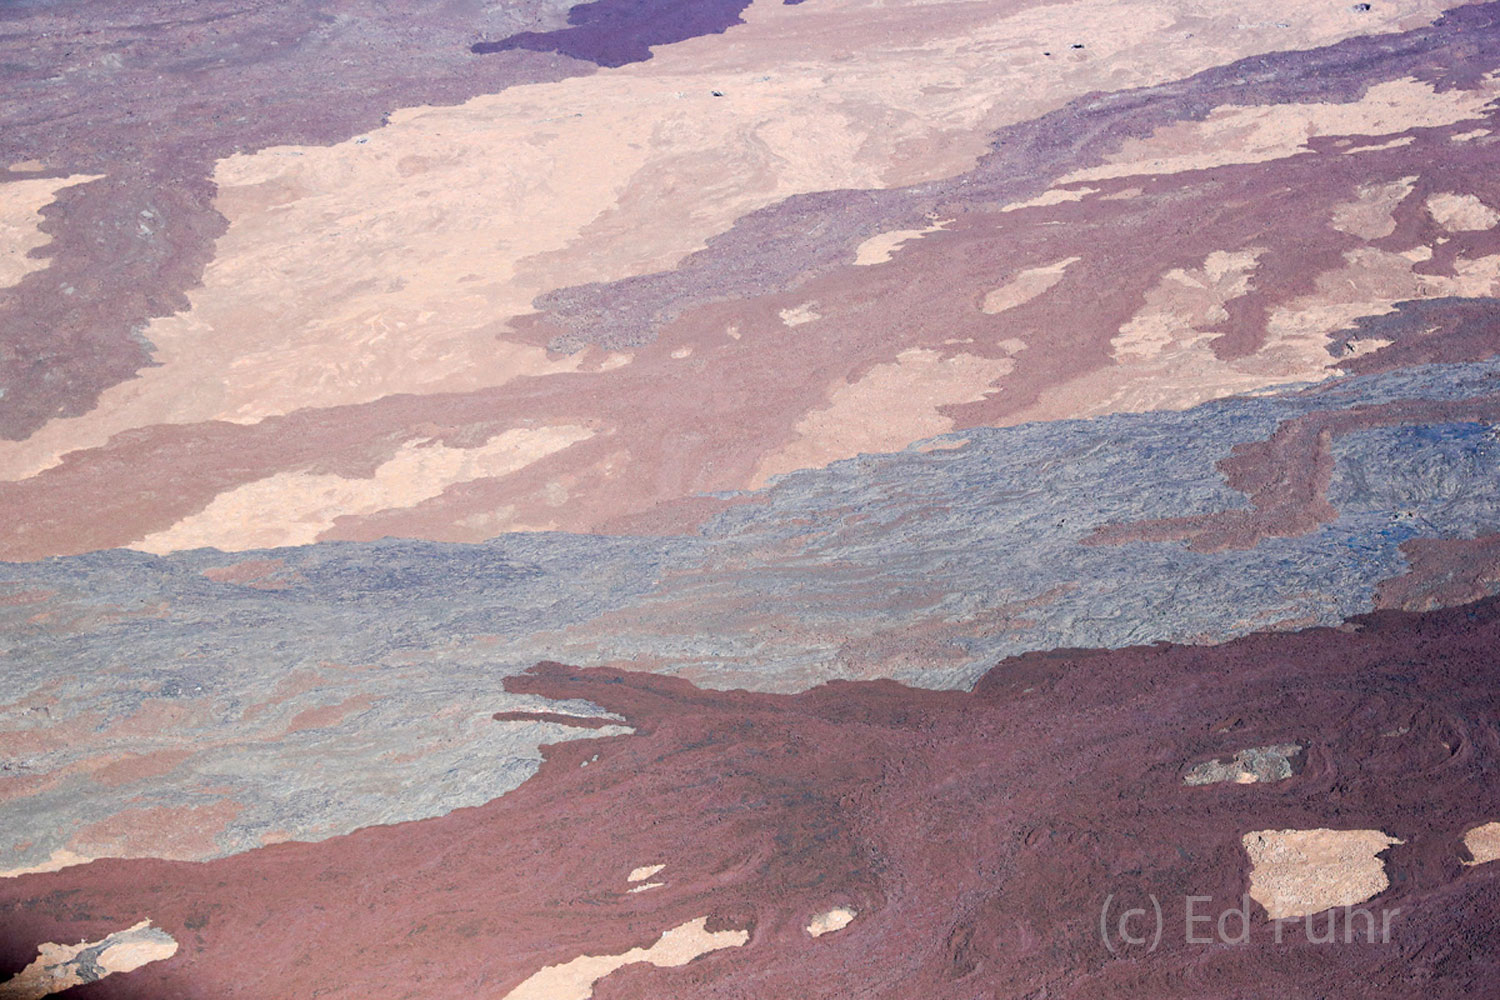 Age old laval flows from prior eruptions are painted in so many pastels.